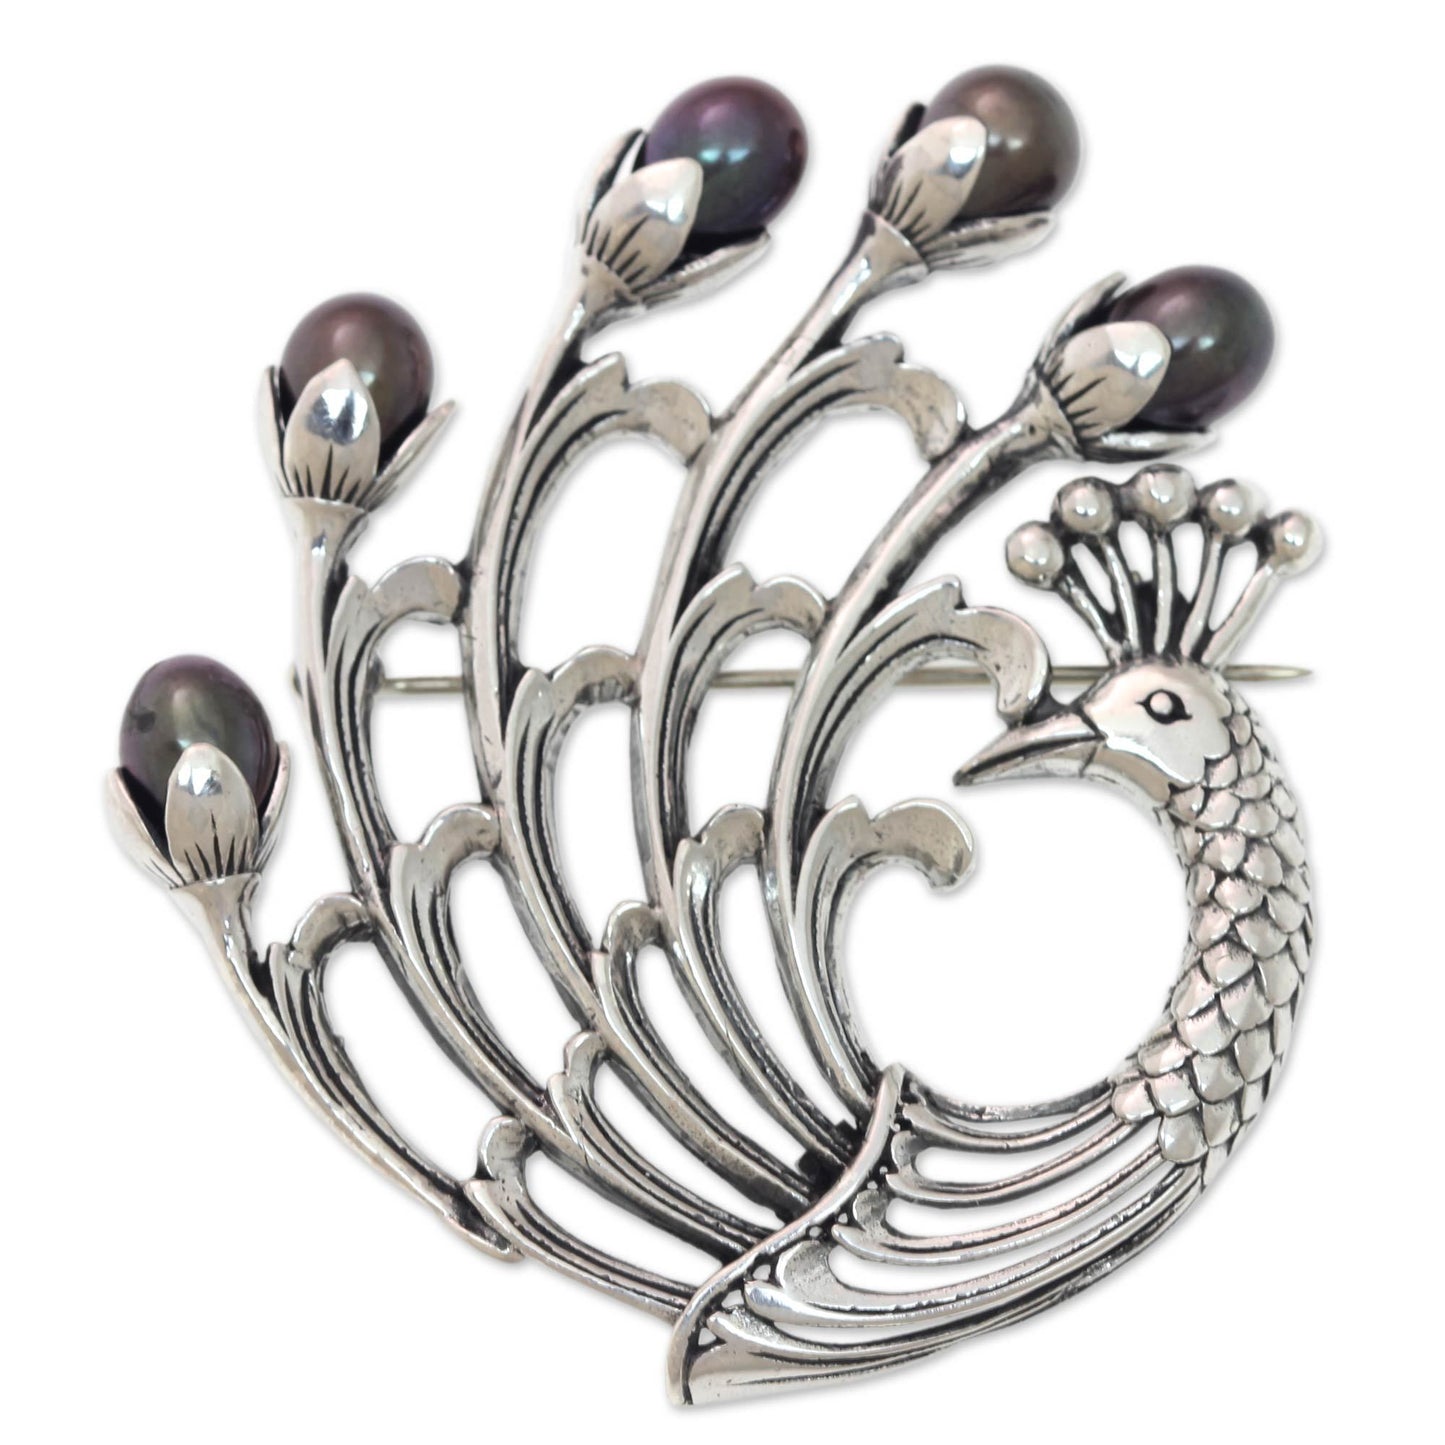 Magnificent Peacock Black Pearl & Sterling Silver Brooch